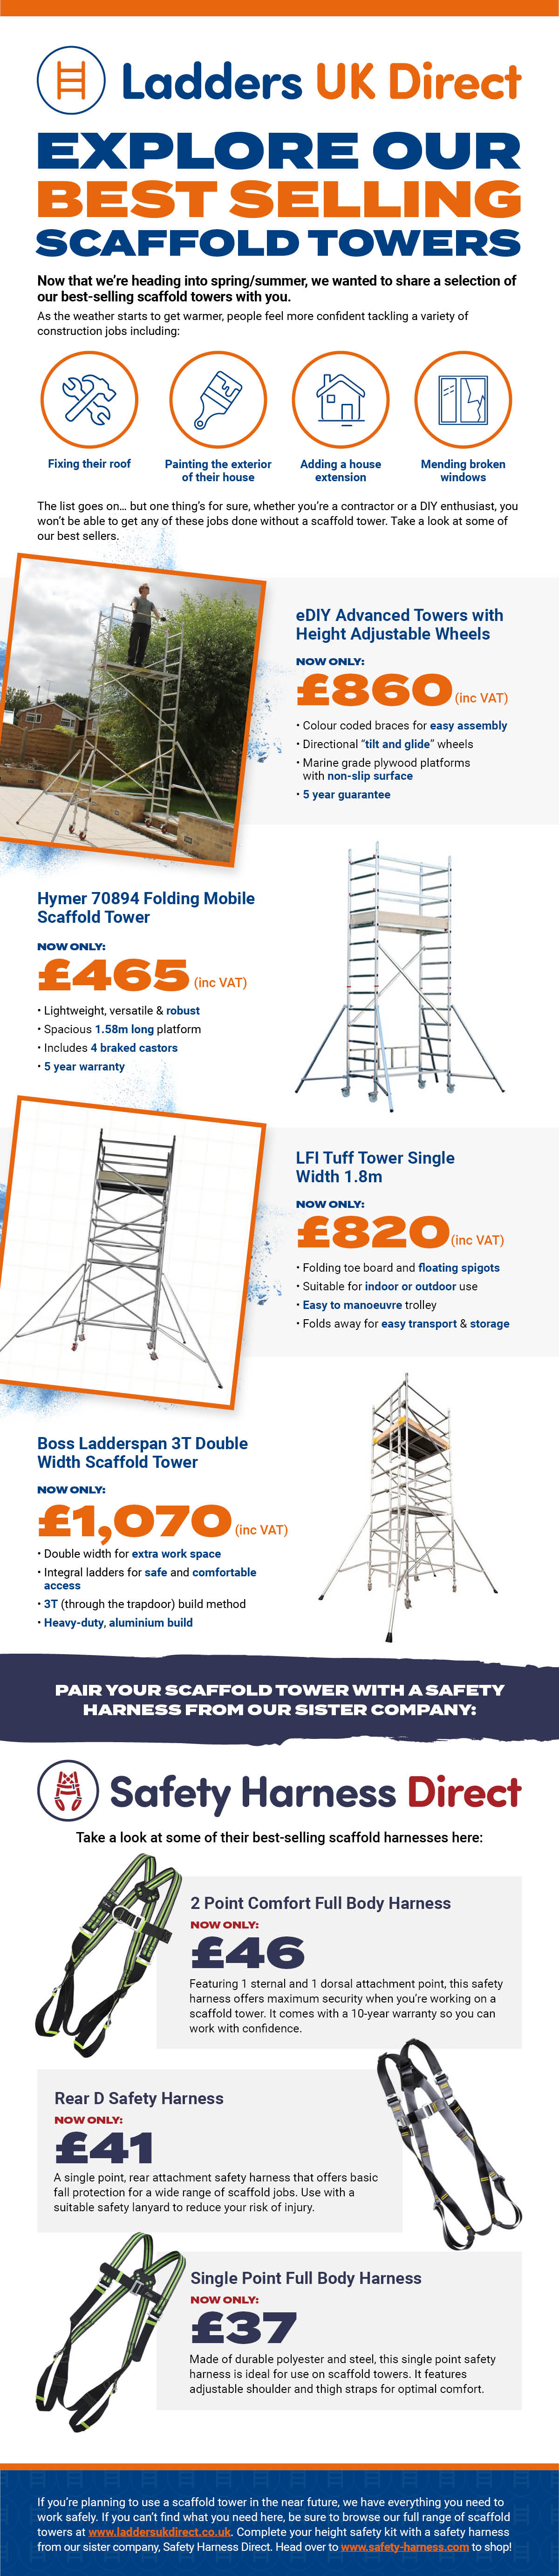 best selling scaffold towers infographic, transcribed below